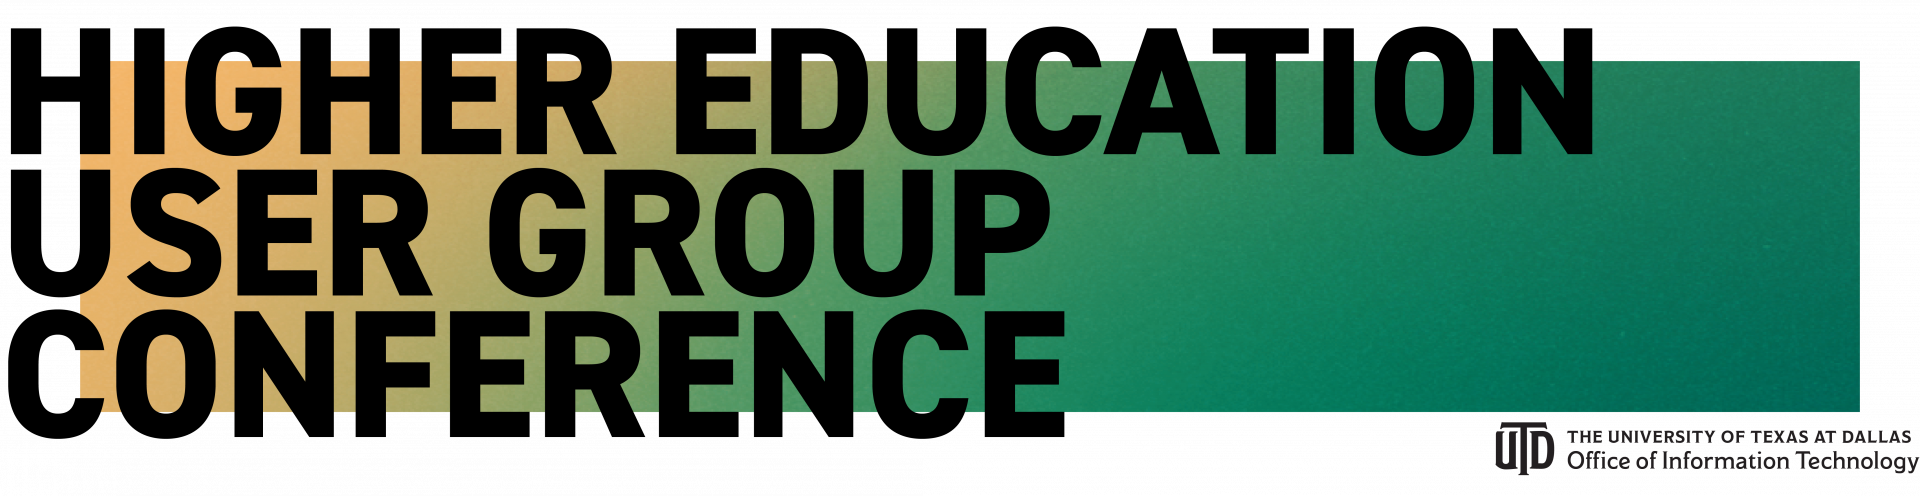 Higher Education User Group Conference